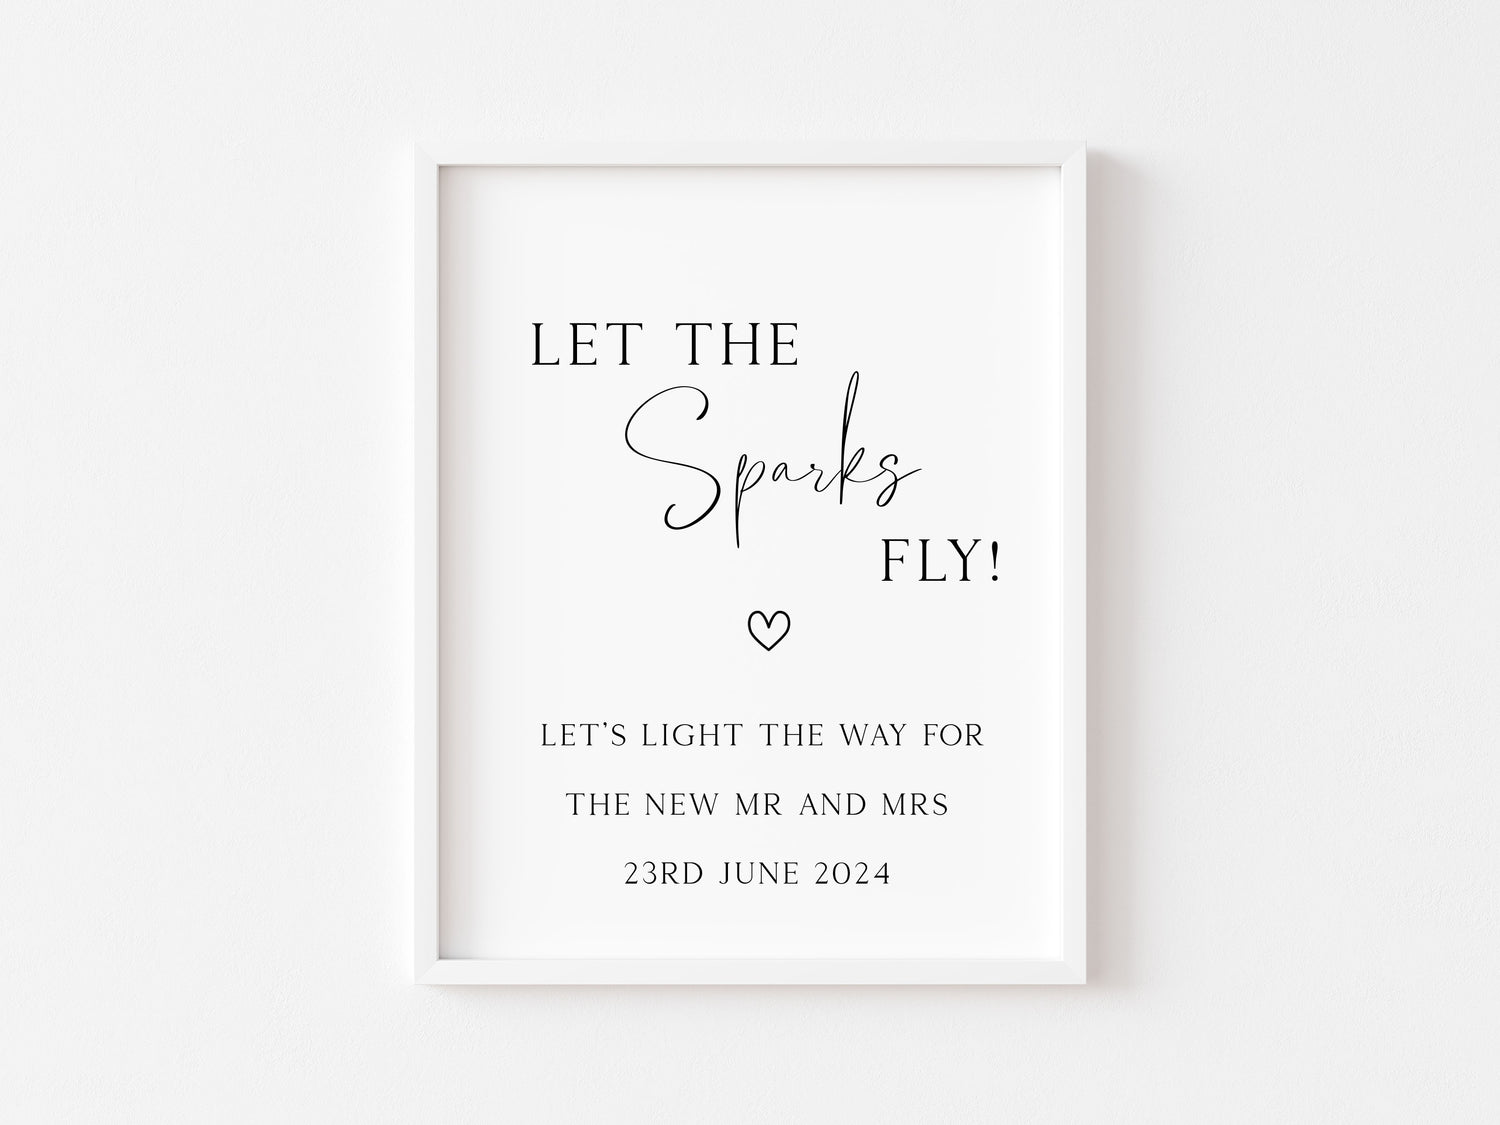 WEDDING CARDS, PRINTS & GIFTS